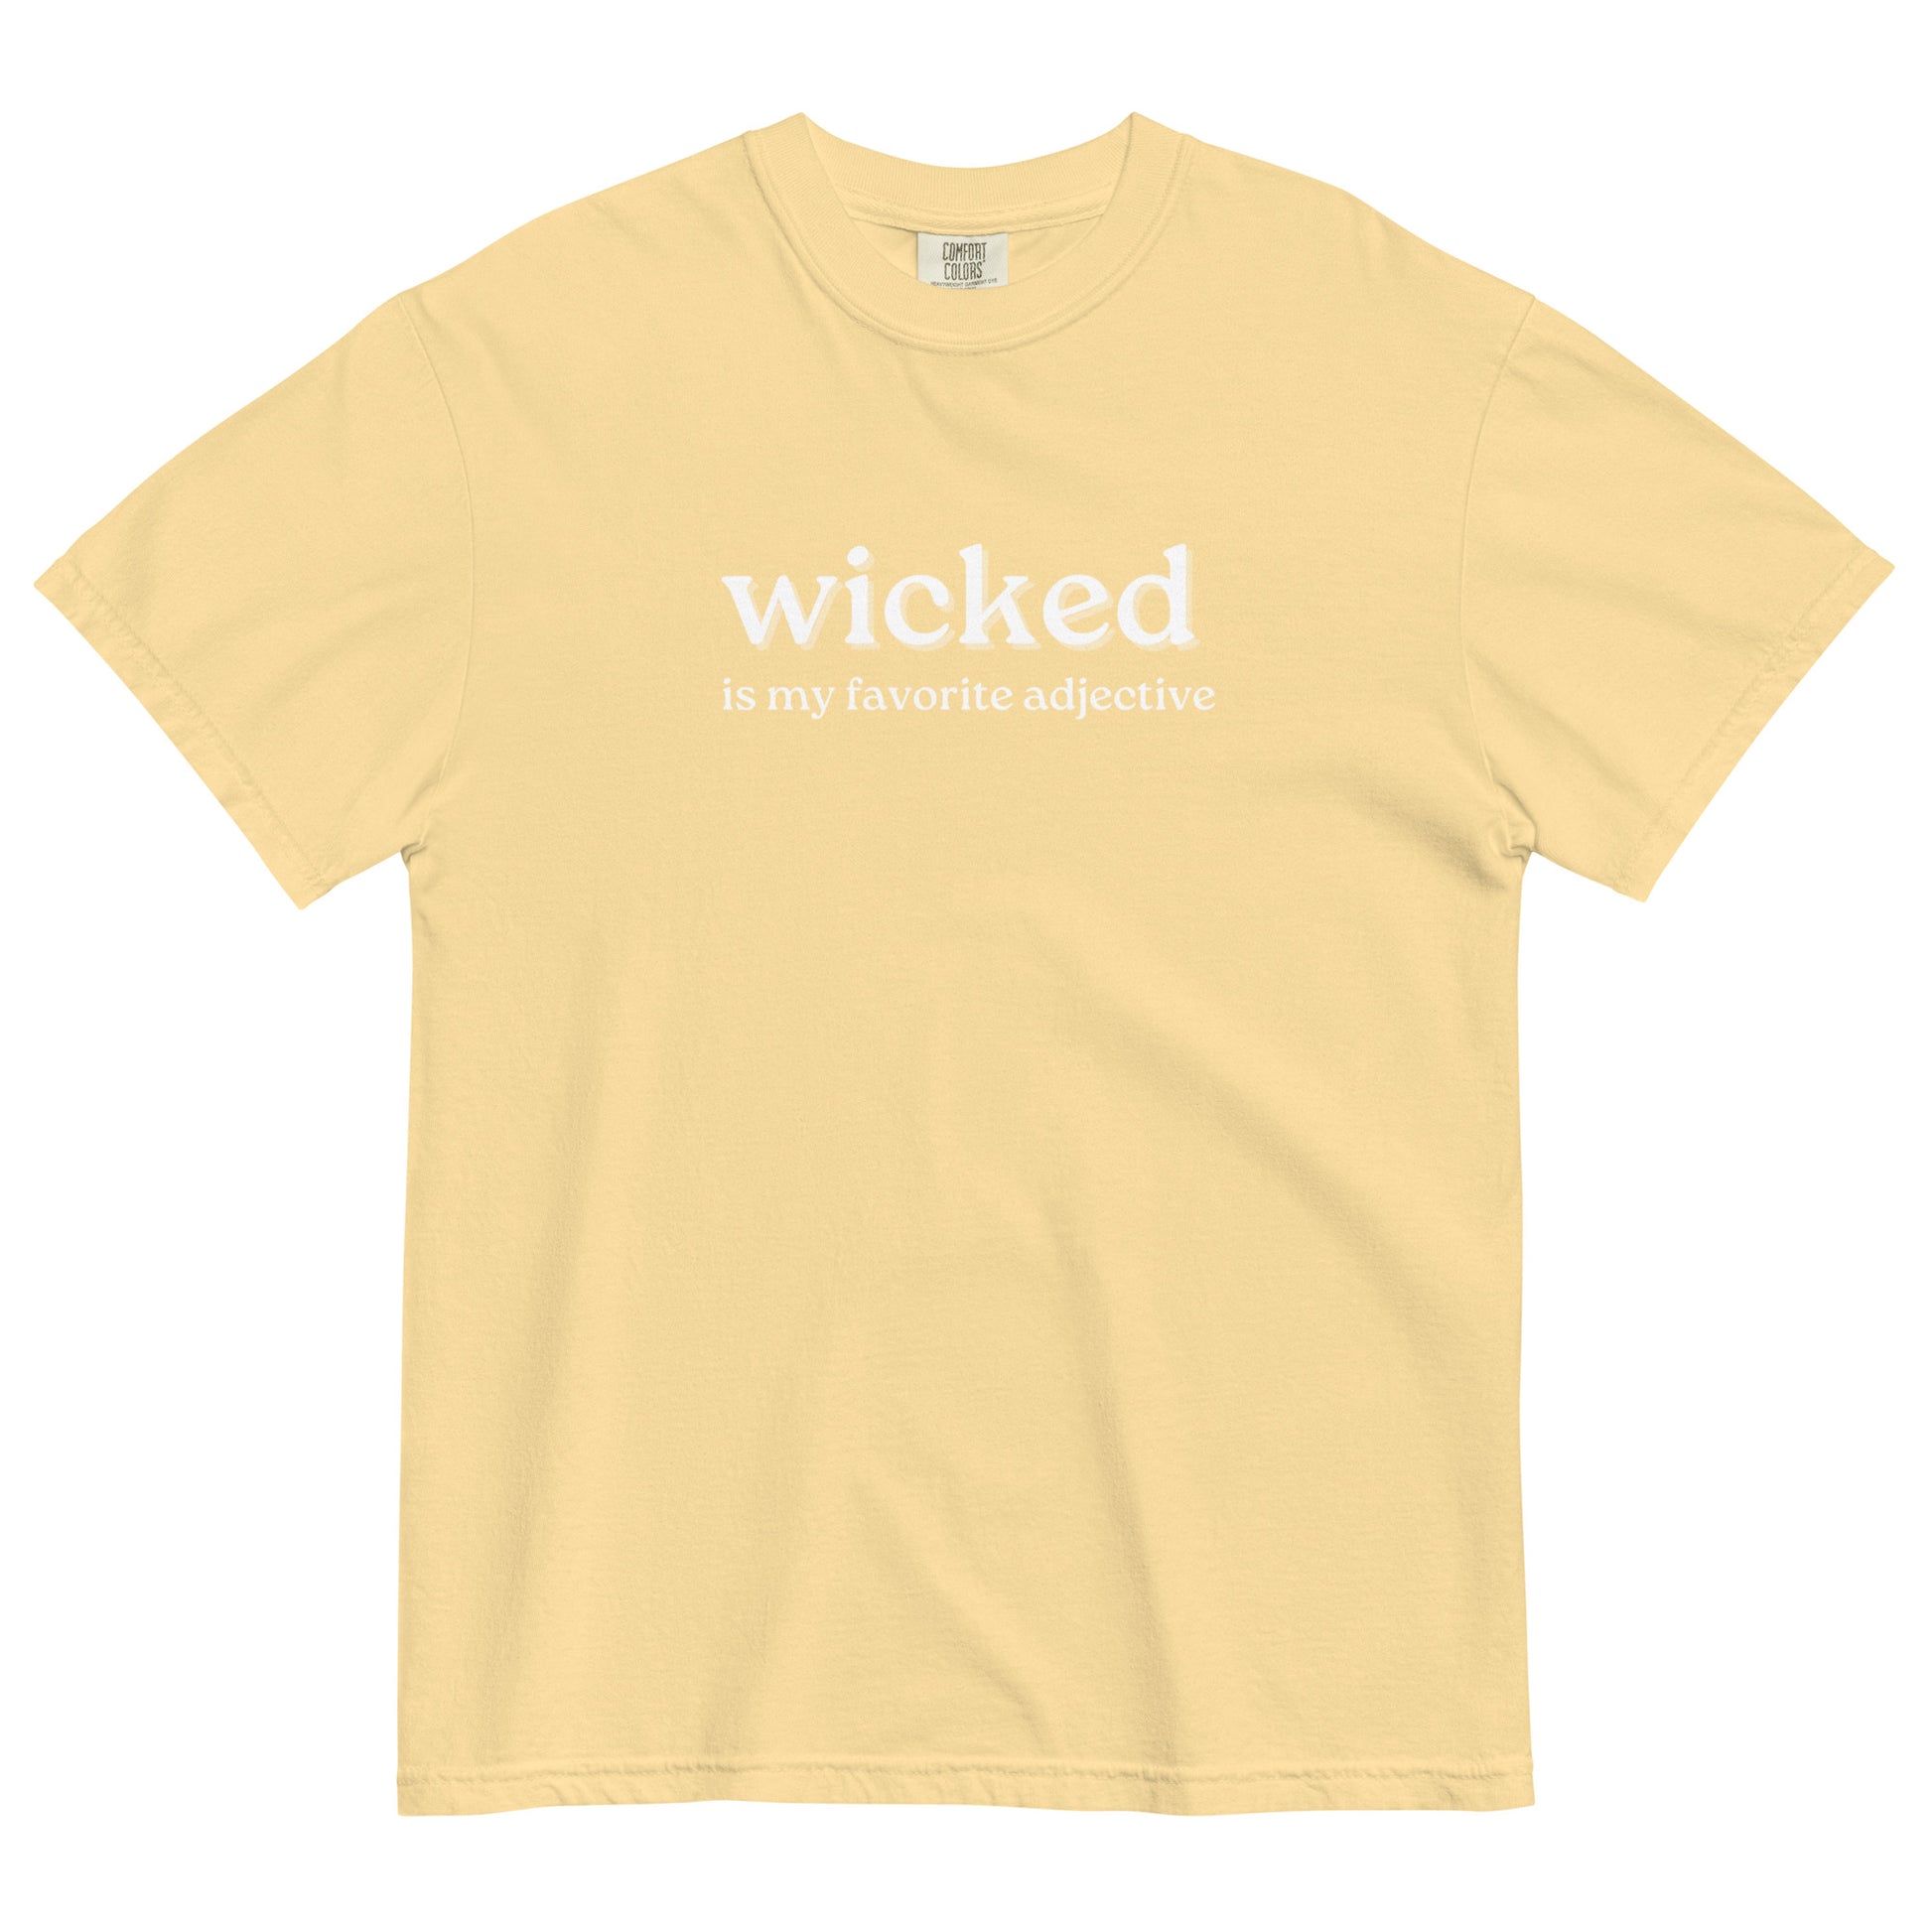 yellow tshirt that says "wicked is my favorite adjective" in white lettering